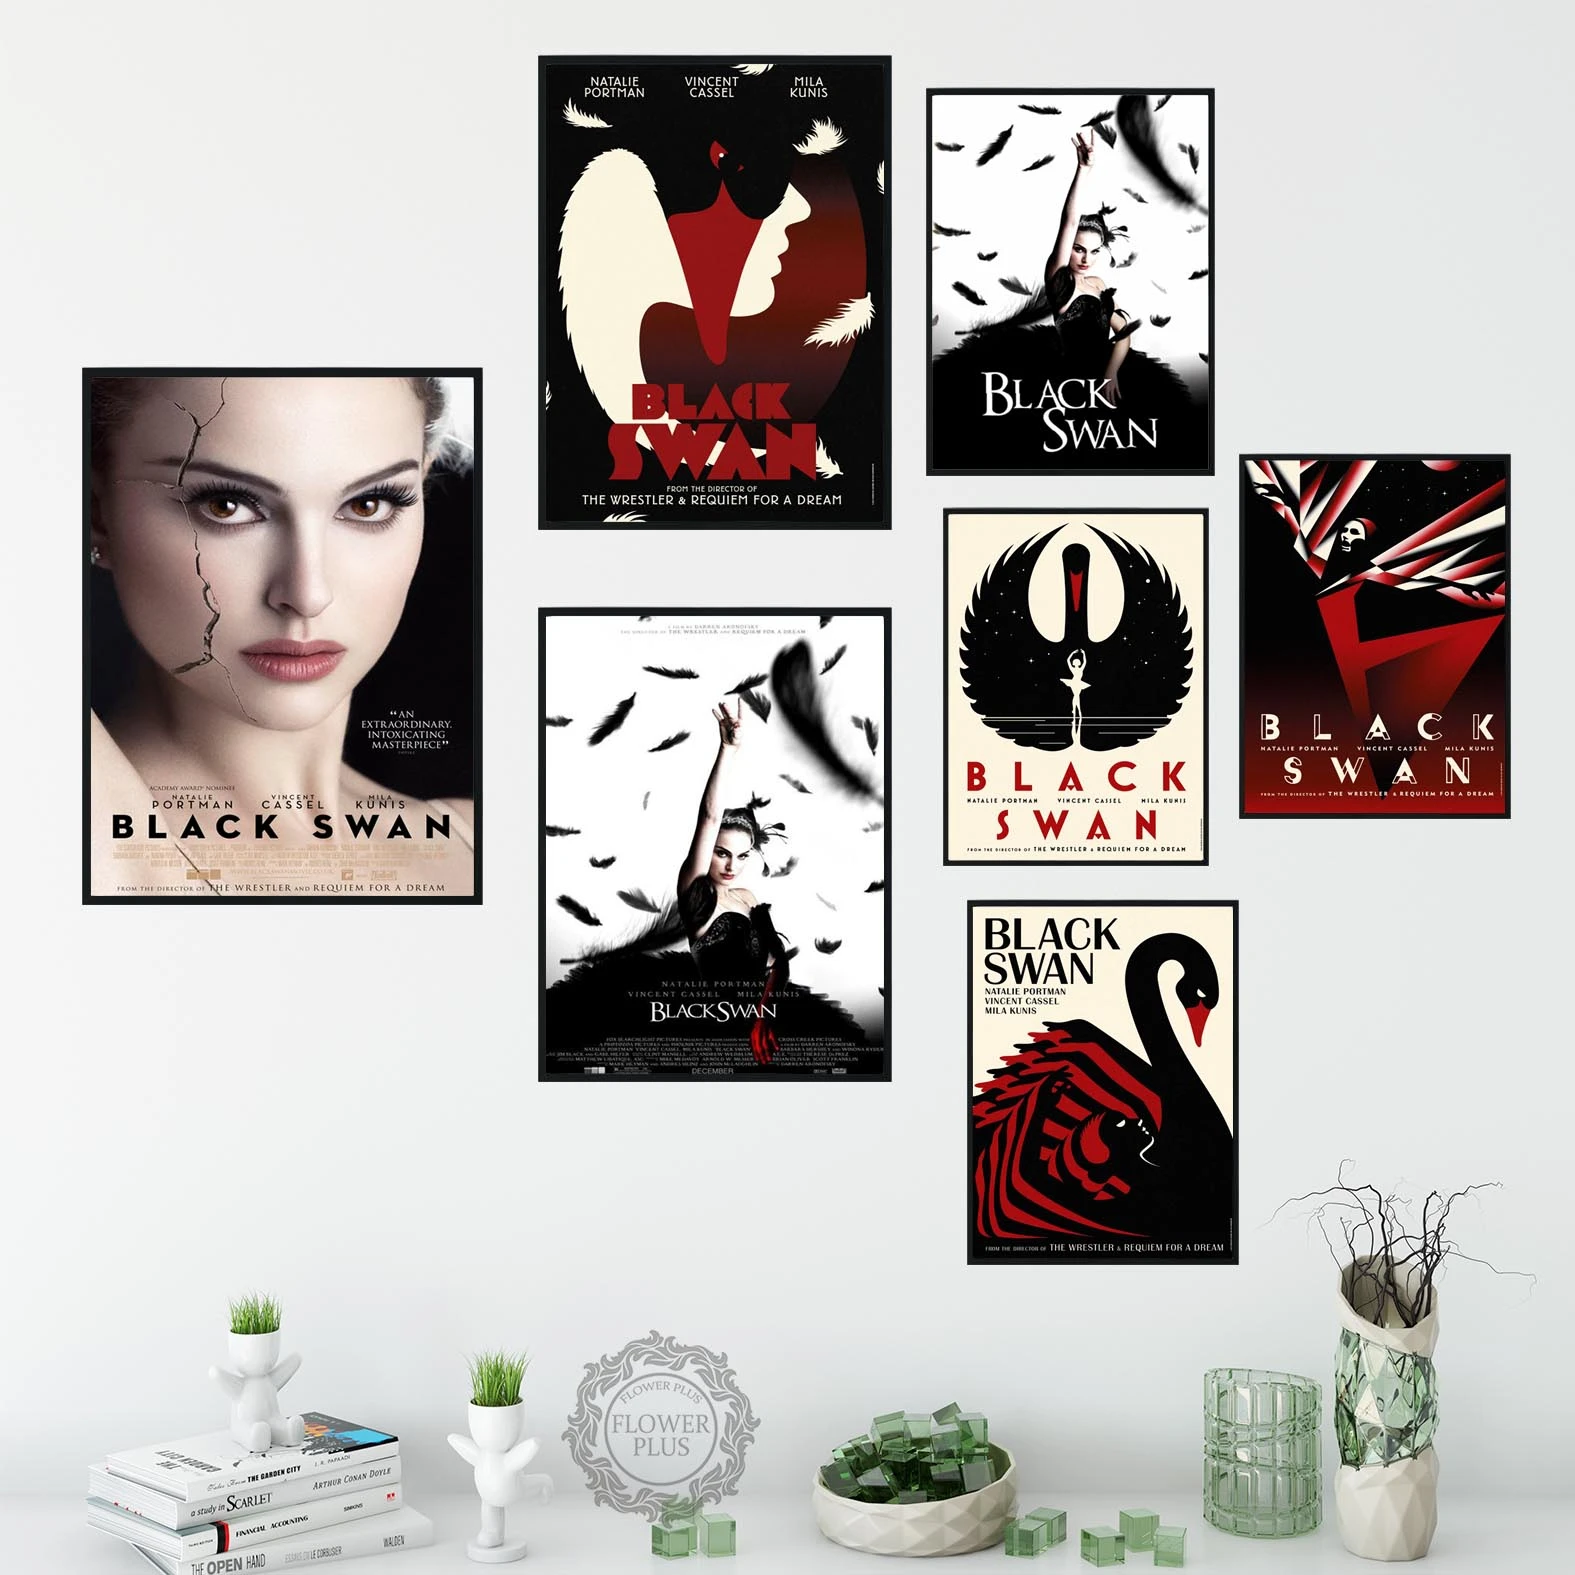 Black Swan Painting Home Decor Art Decor room posters wall art canvas painting No Frame на стену|Painting & Calligraphy| - AliExpress